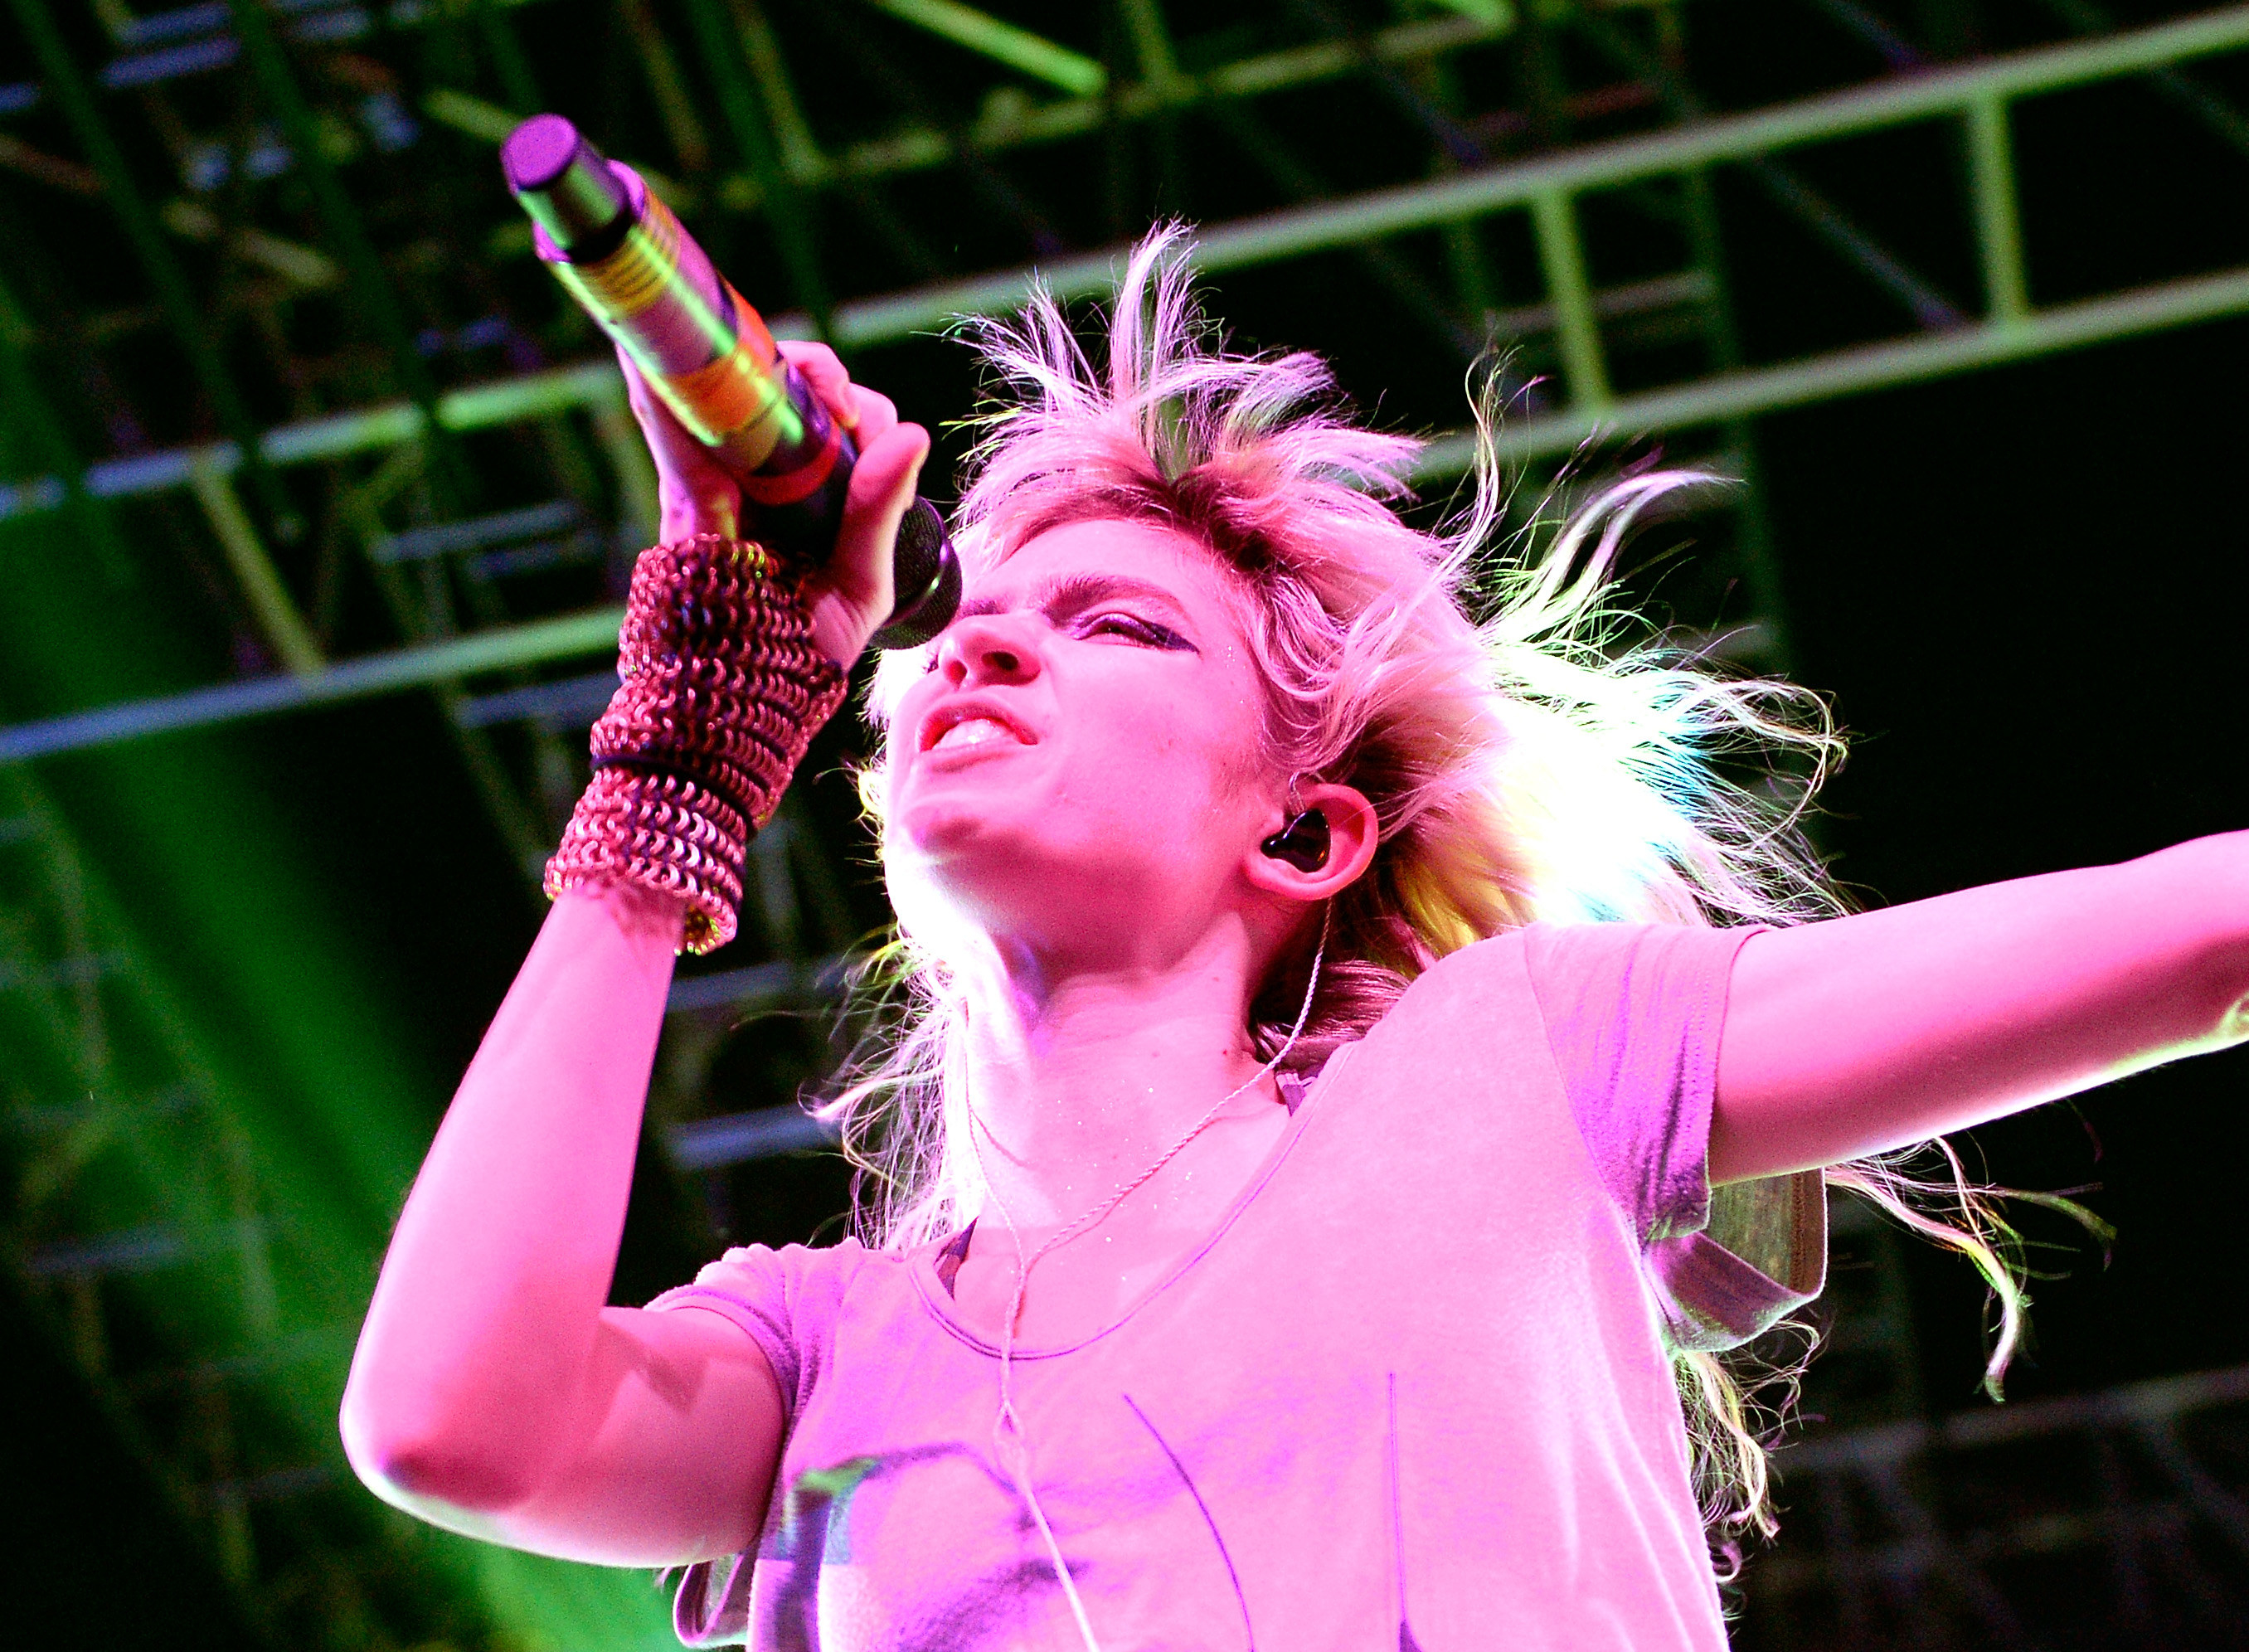 Grimes passionately performing onstage